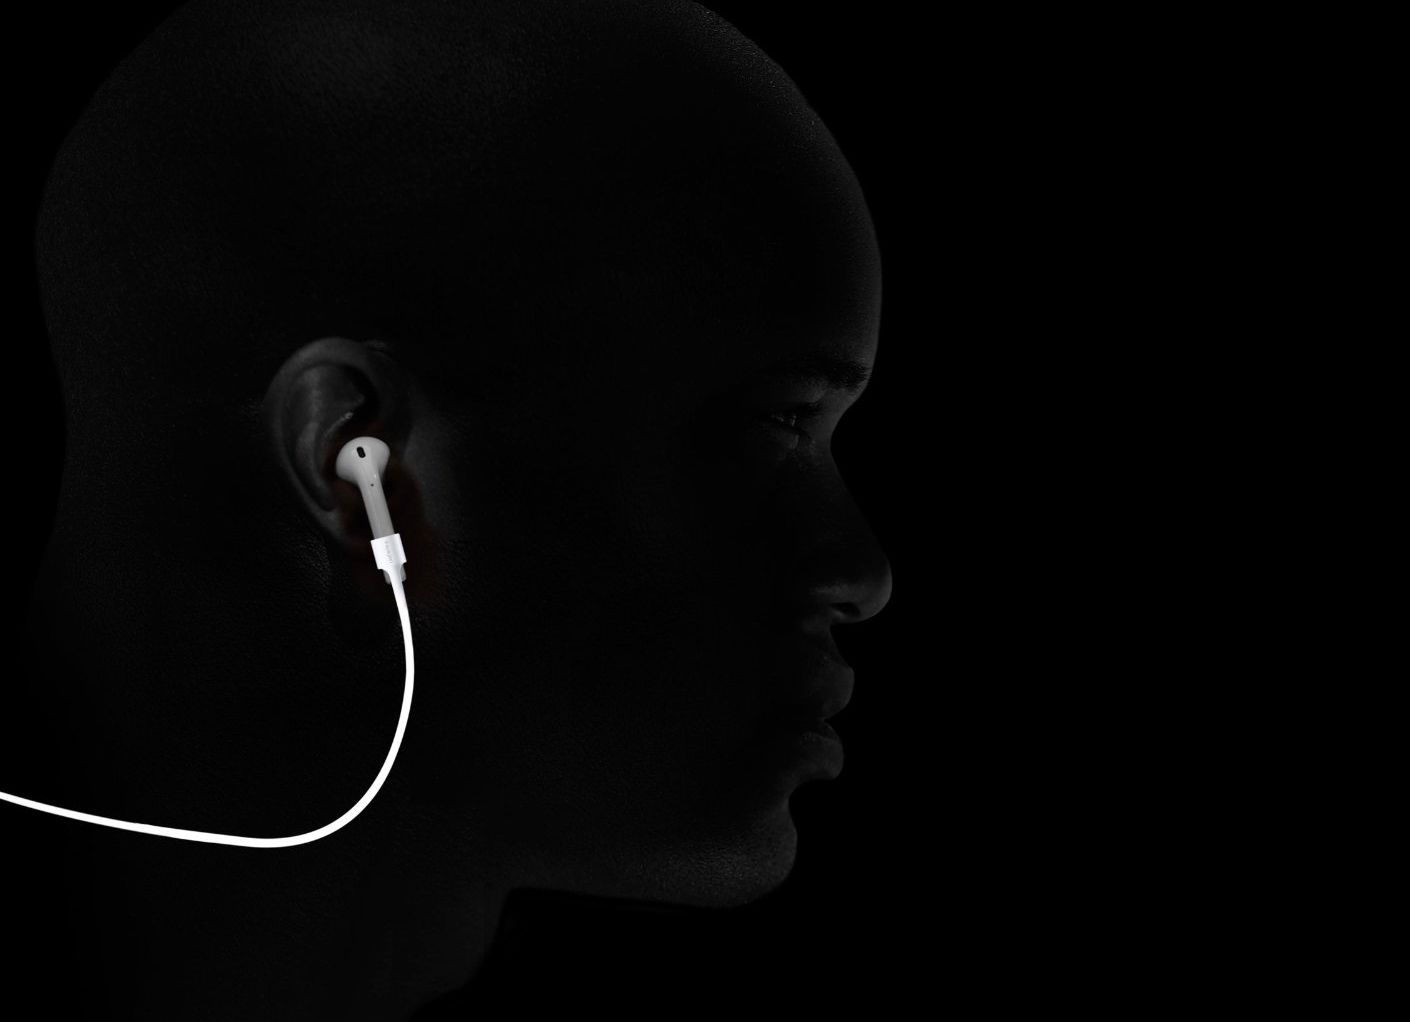 spigen s airpods strap ensures you won t lose apple s new airpods image 1